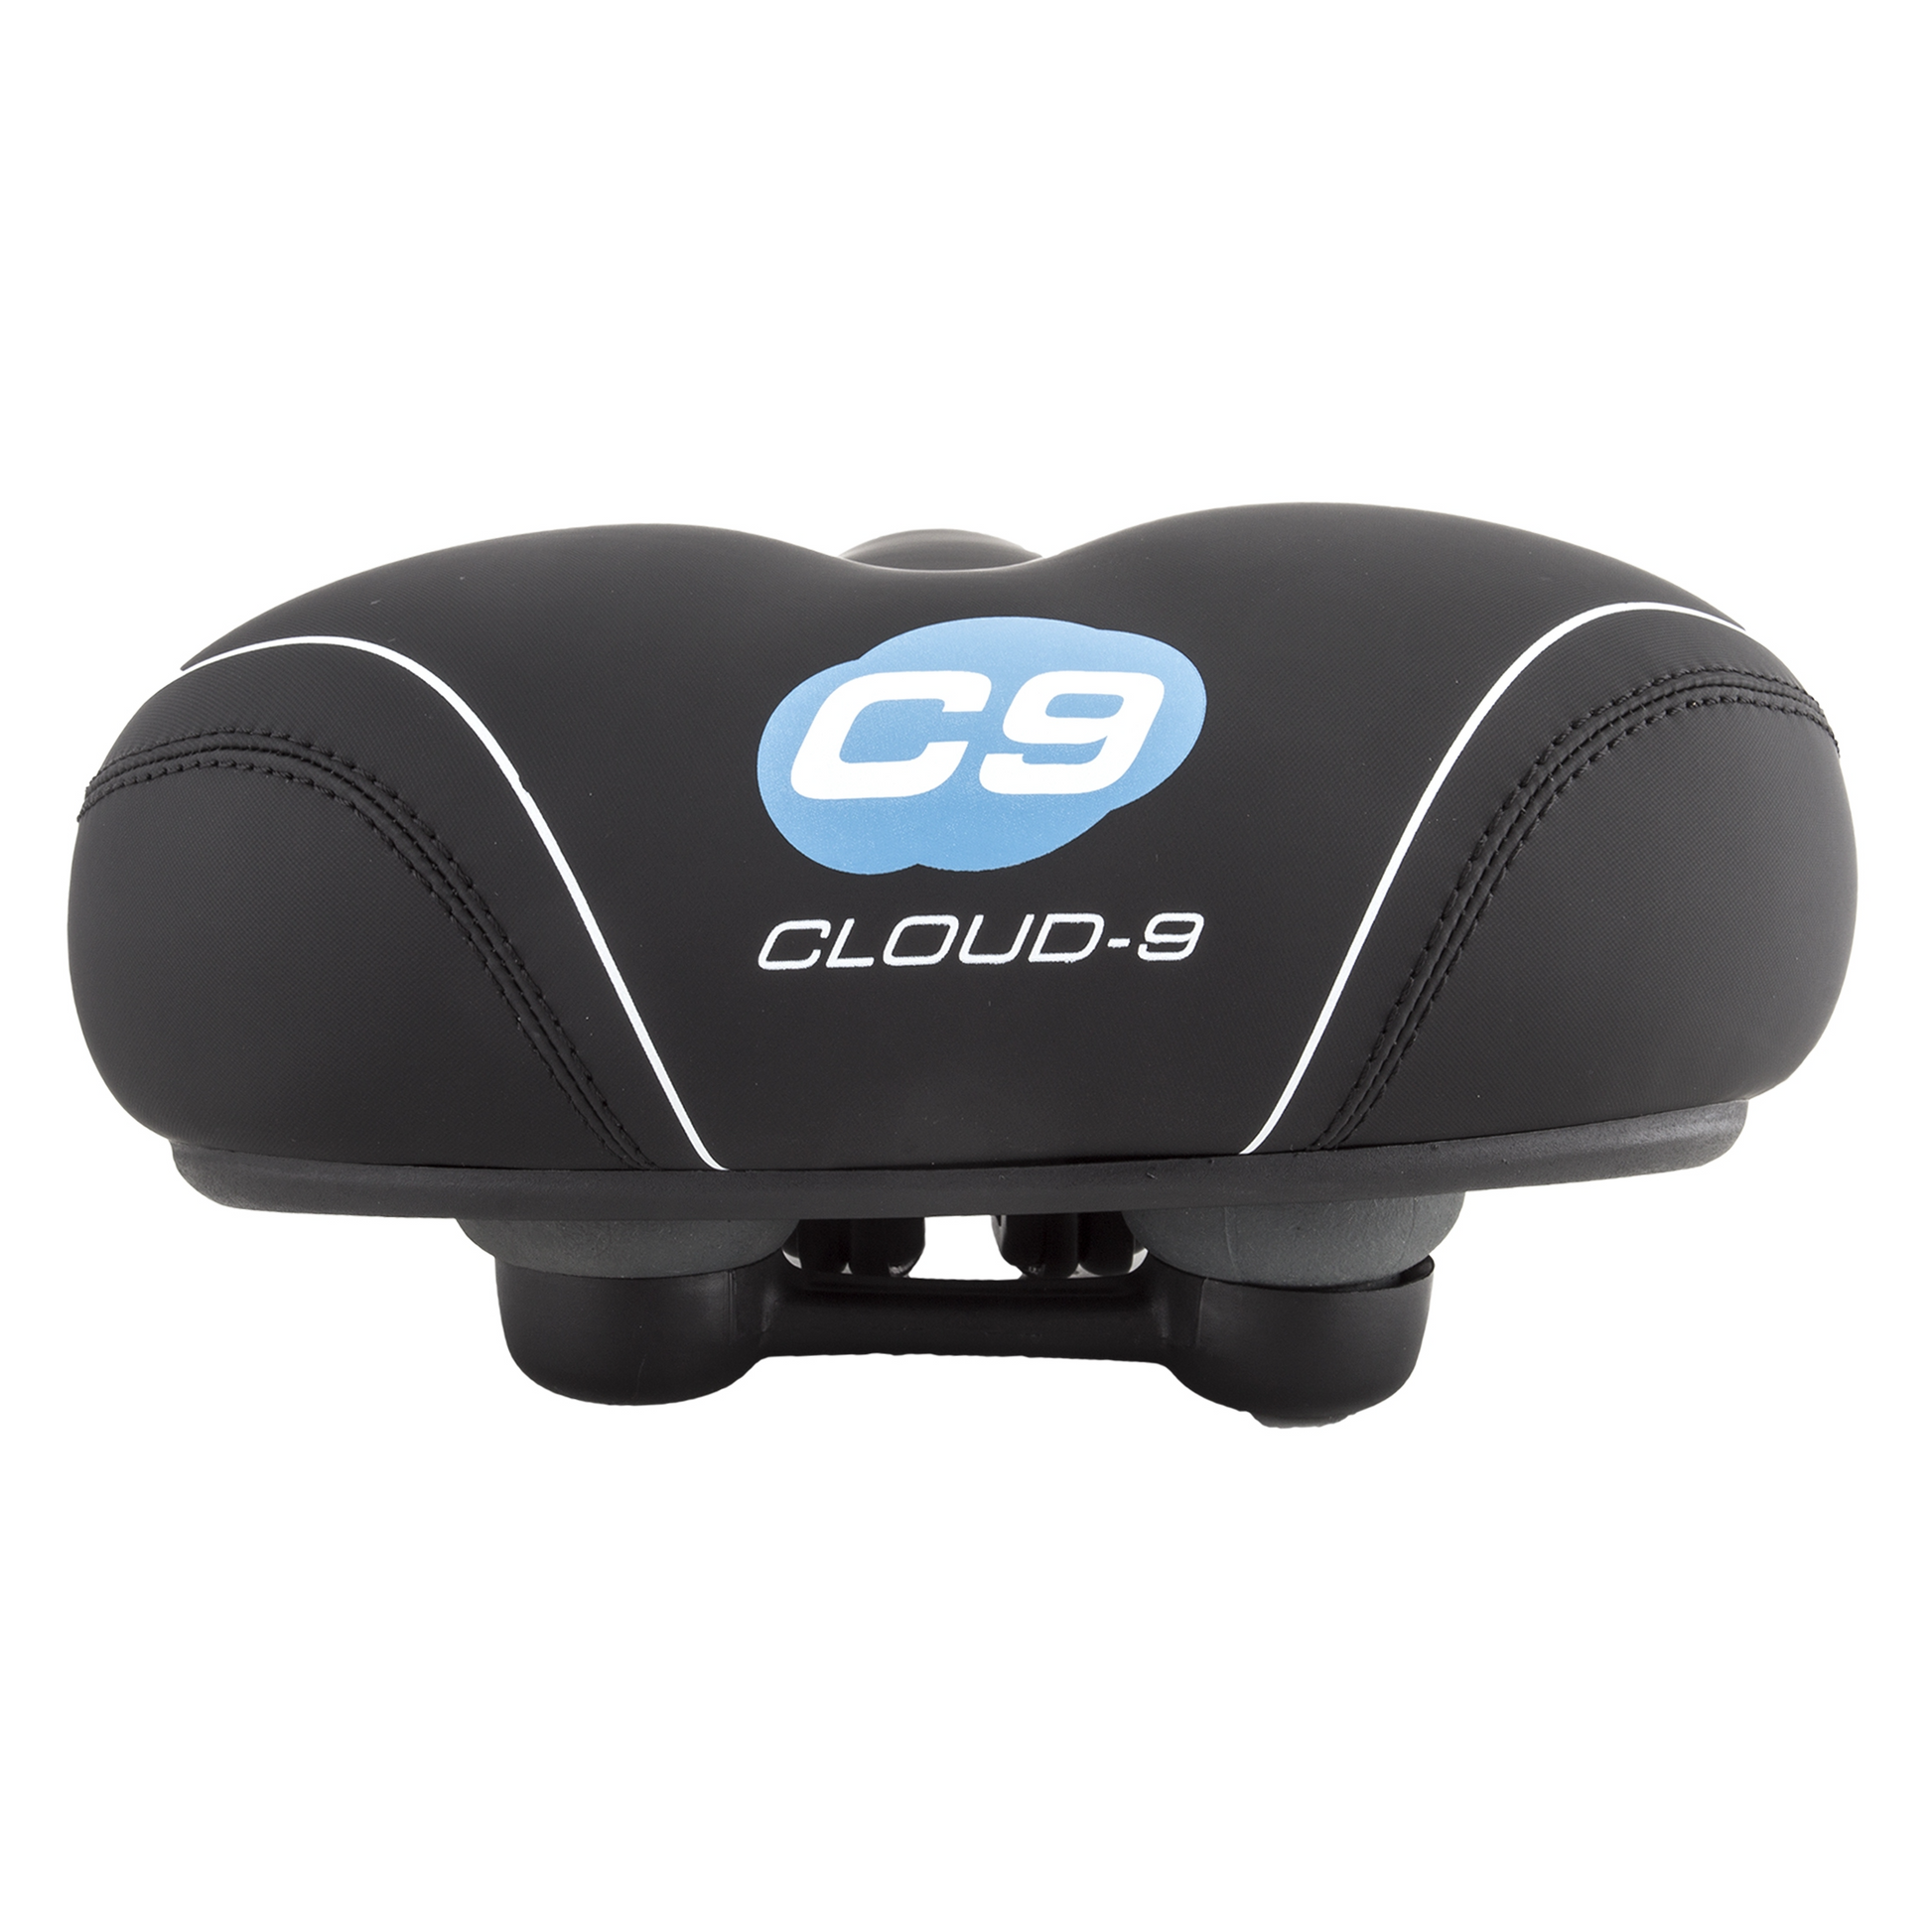 CLOUD-9 Cruiser Select seat pad is a soft touch vinyl cover designed specifically for cruiser bike seats. It features an anatomic relief design, providing added comfort and support during long rides.